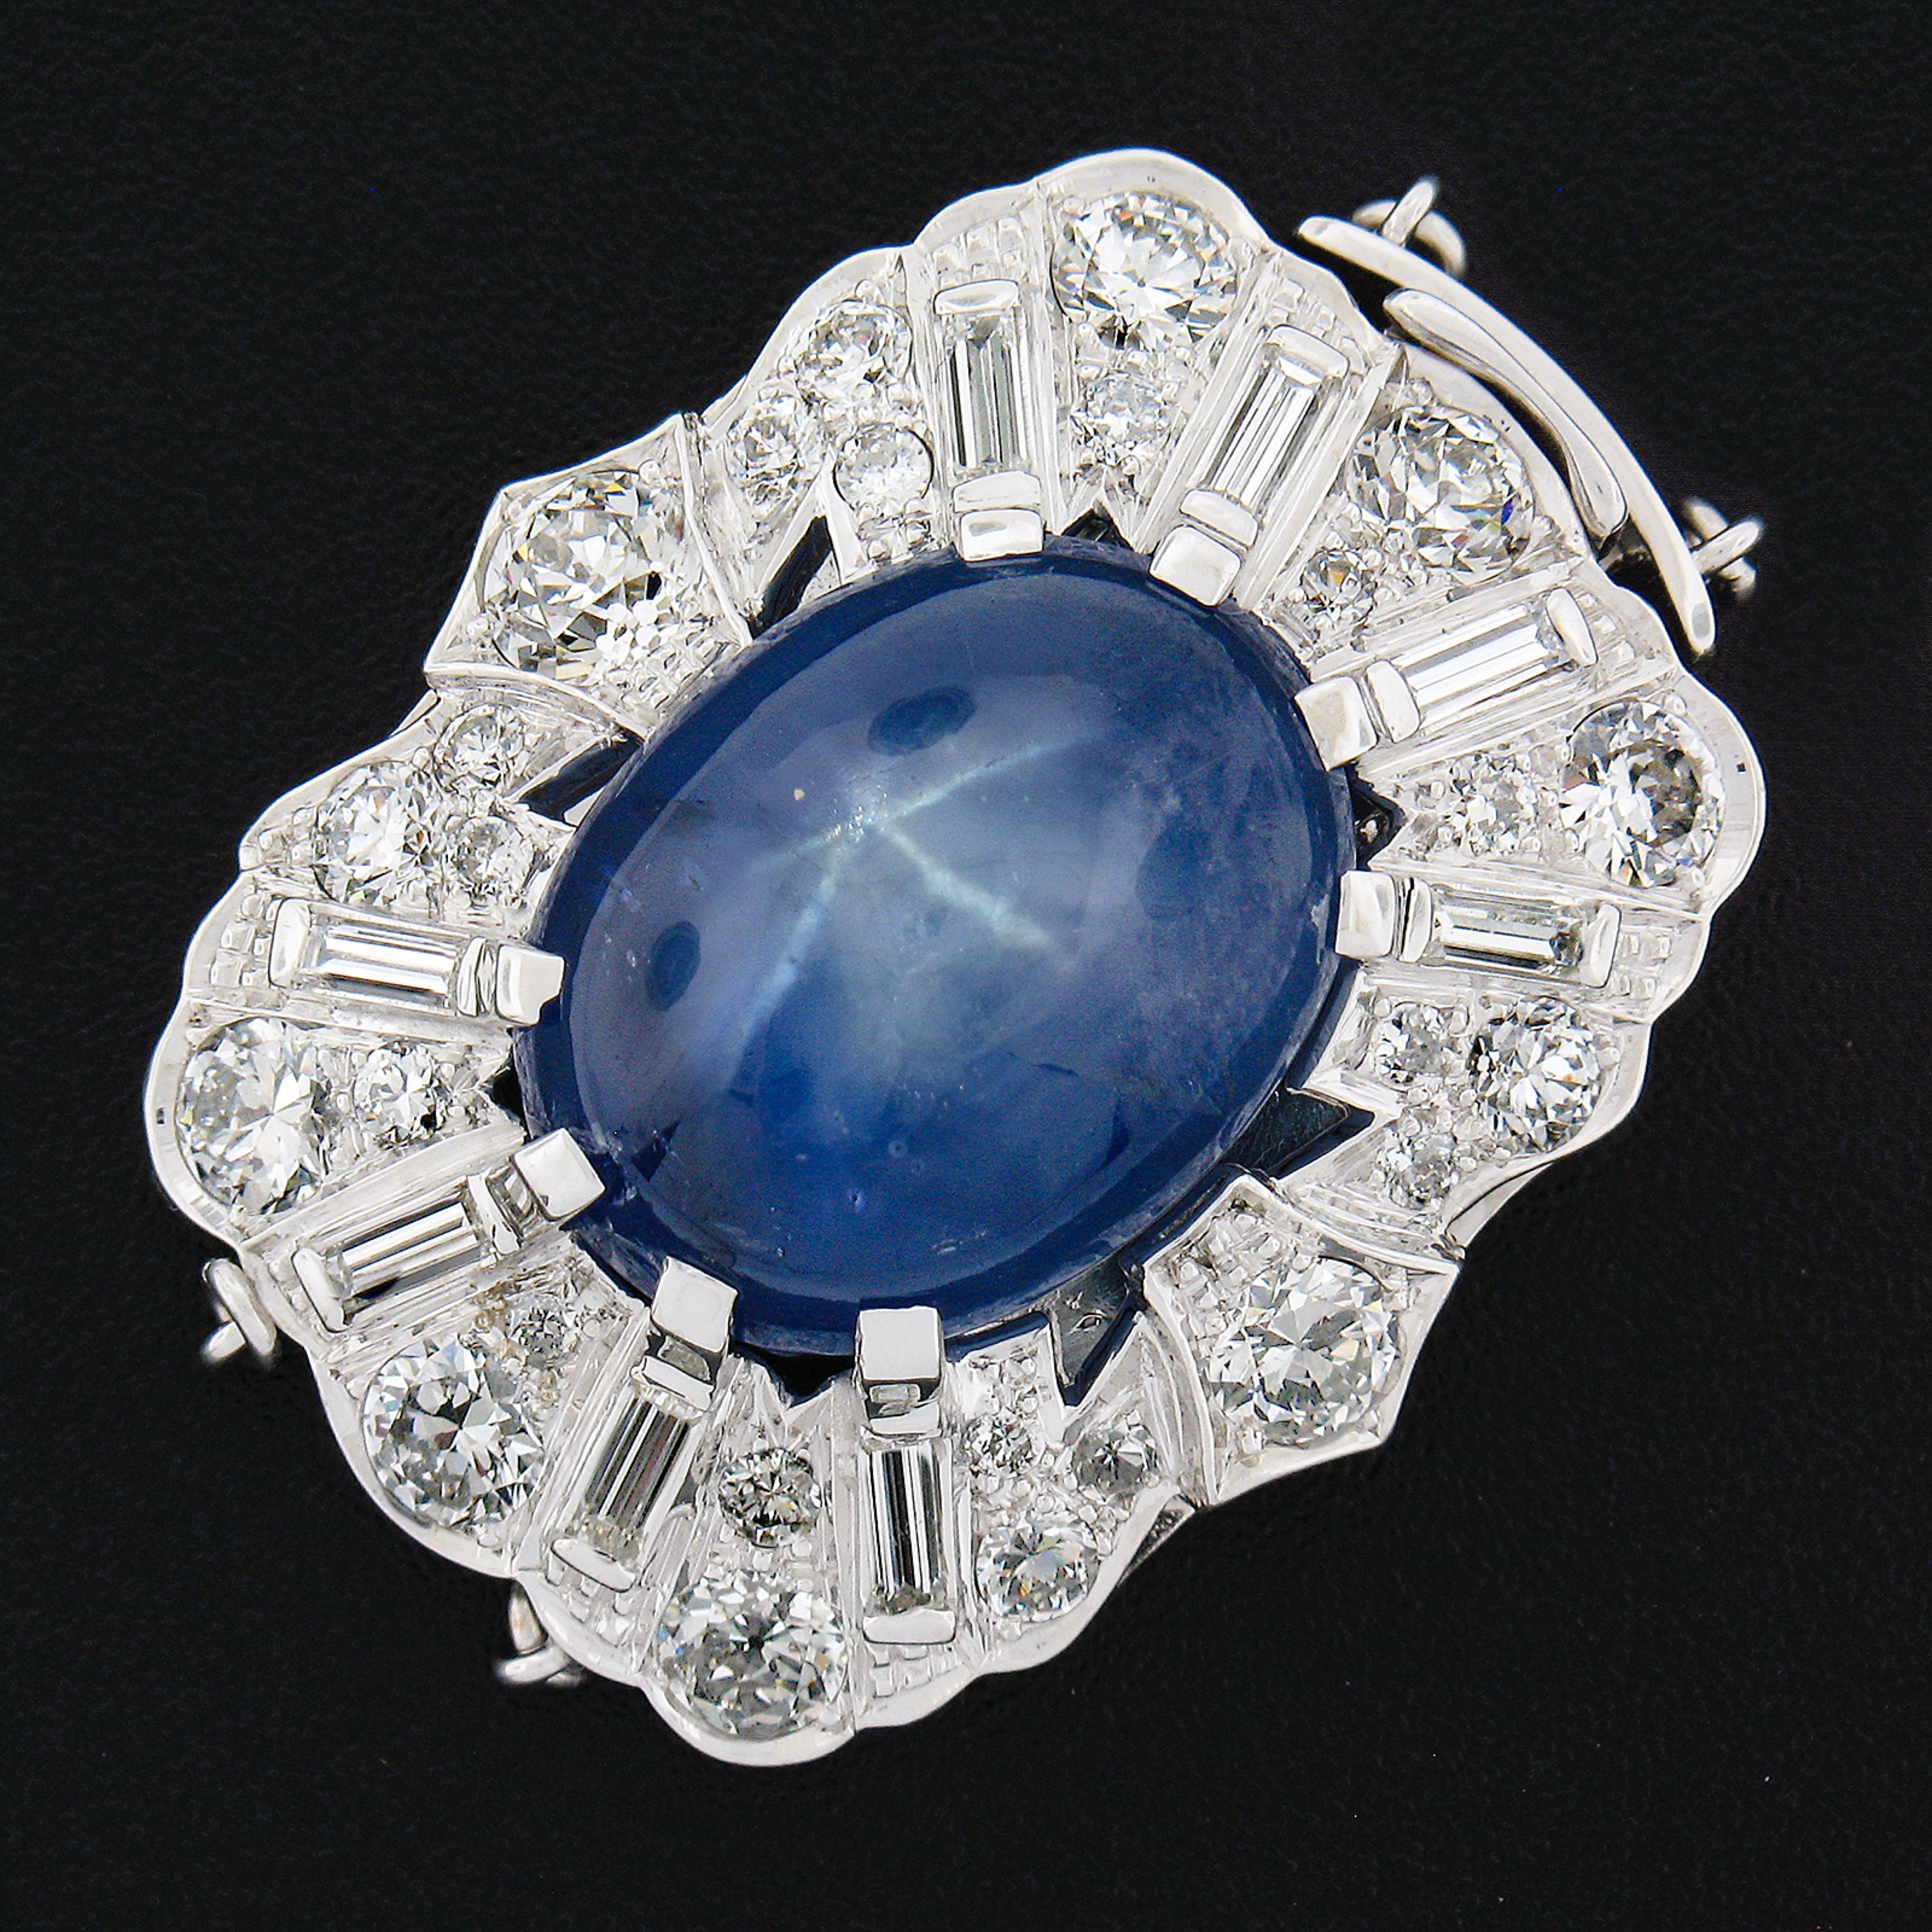 This is a truly jaw dropping and very well made midcentury two strand clasp that is designed by Erwin Reu Co. and crafted from solid 14k white gold. This large fancy clasp features a beautiful, GIA certified, star sapphire stone neatly prong set at